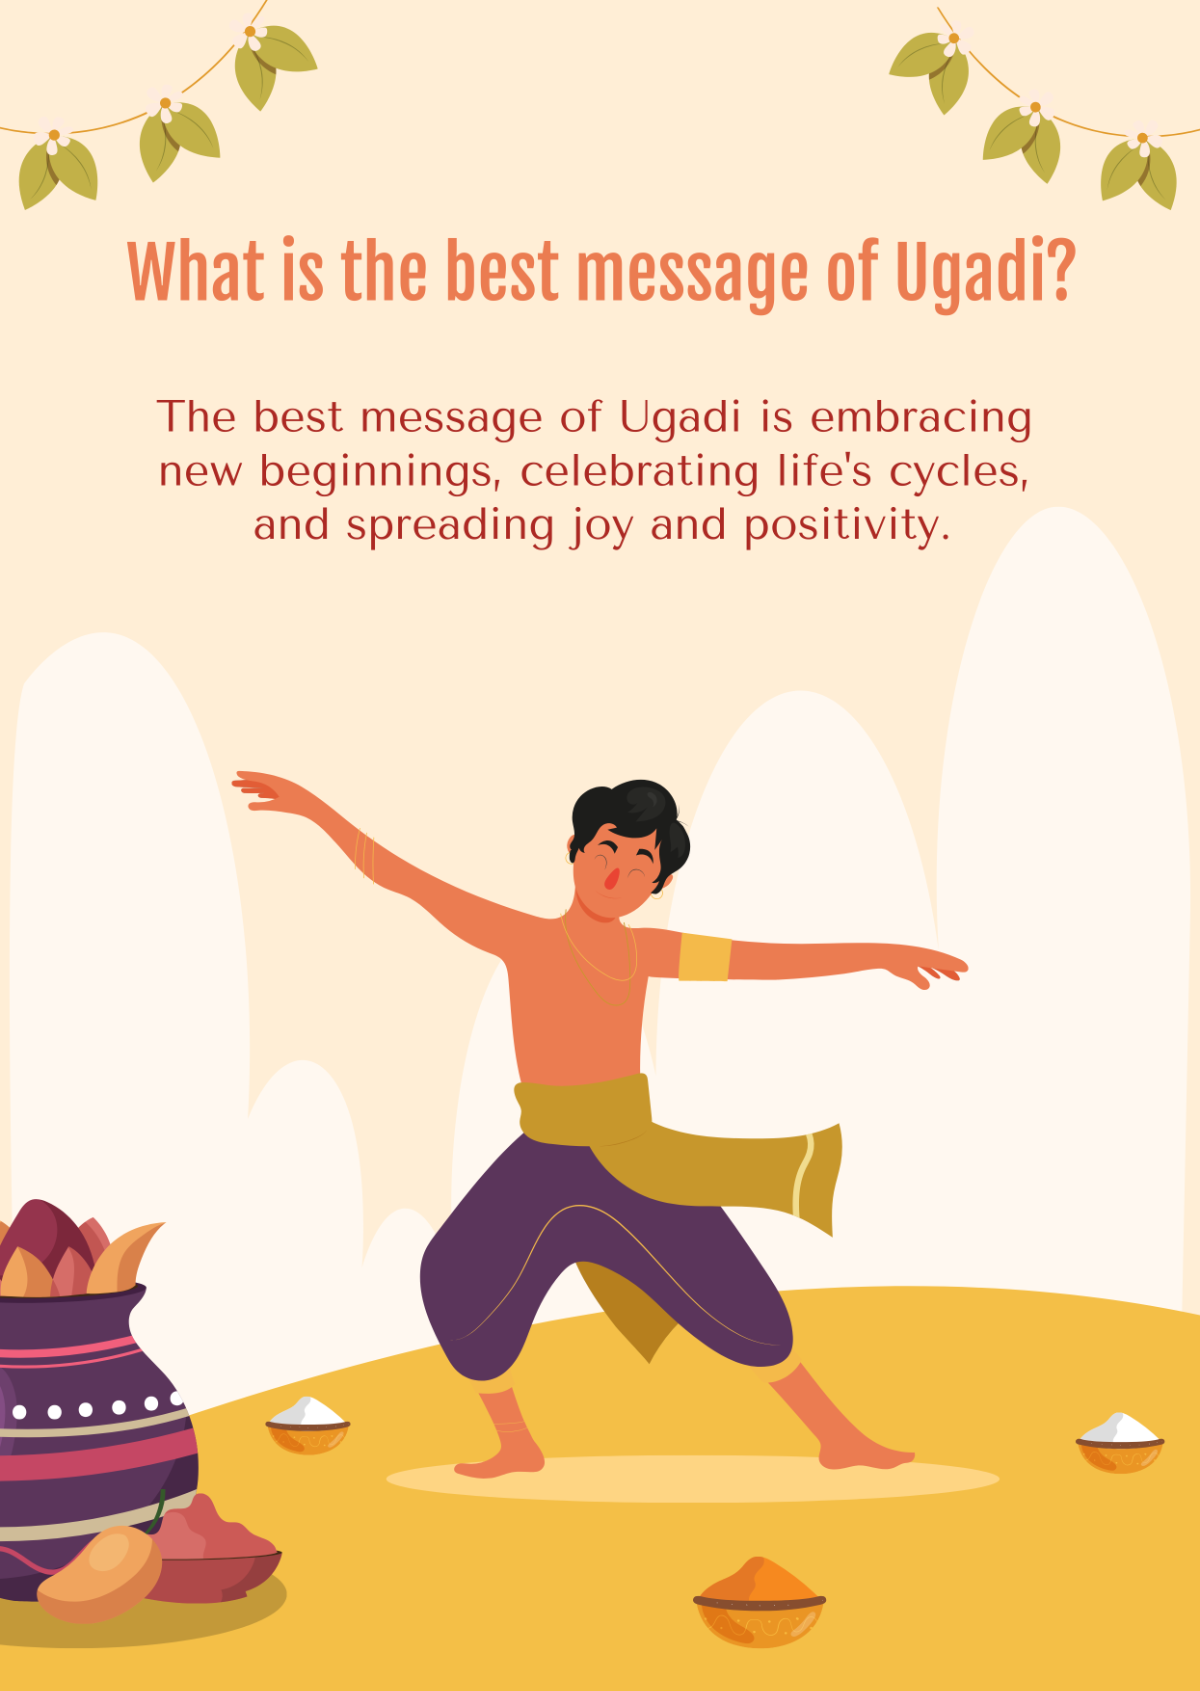 Free What is the best message of Ugadi Template